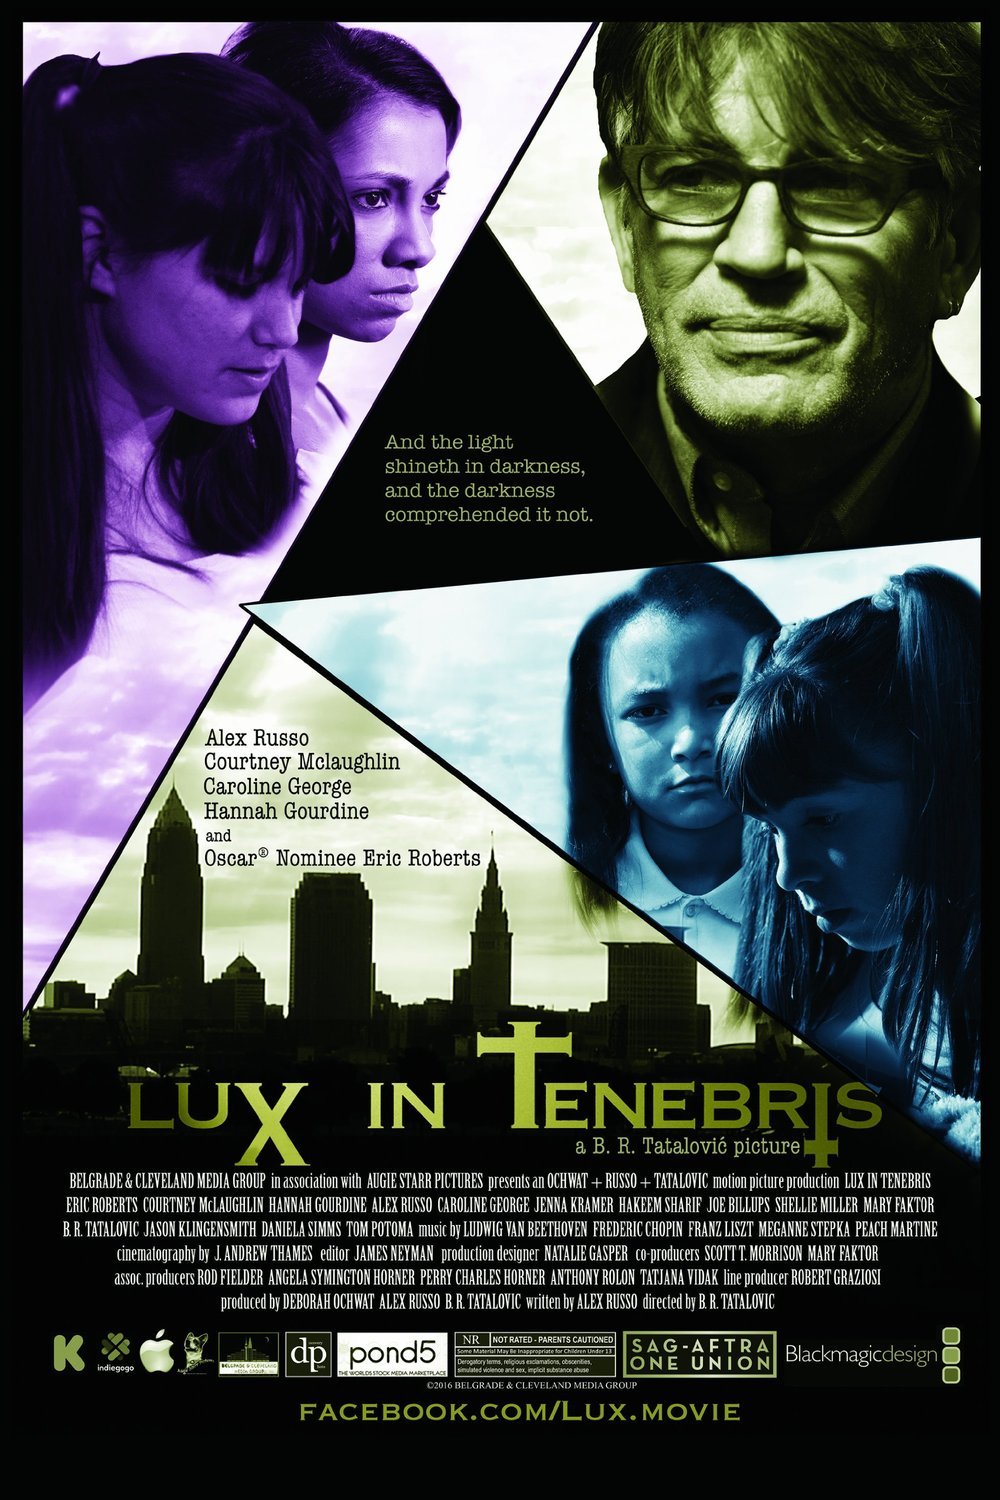 Poster of the movie Lux in Tenebris